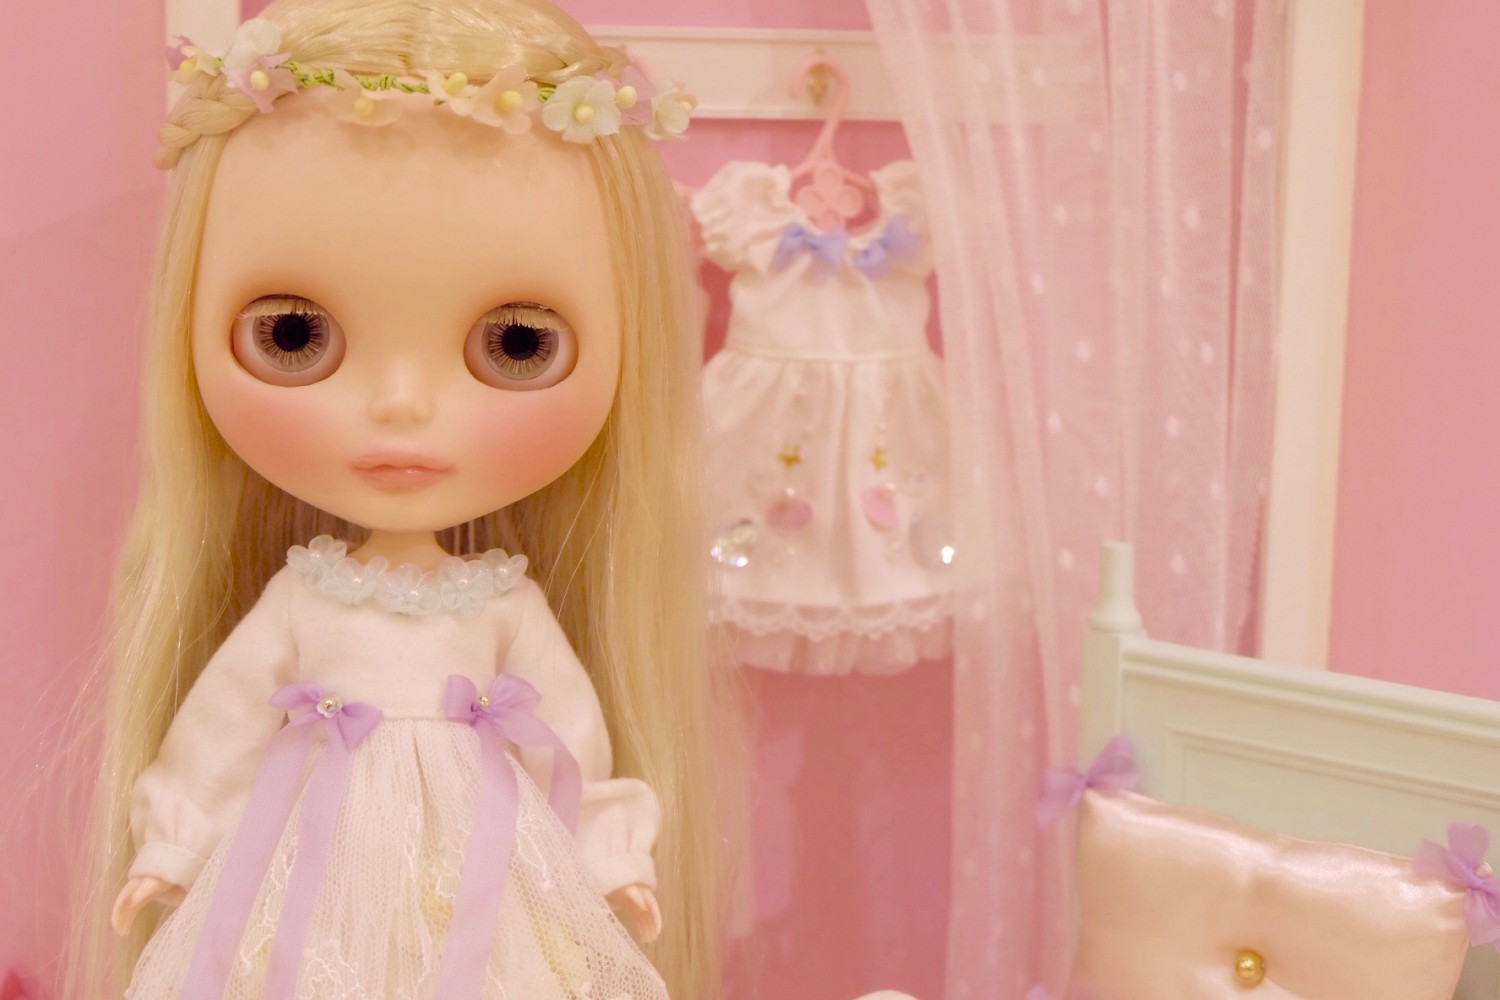 Taking you to the World of The Dreamy Doll House! Japanese Kawaii all in one Blythe Dolls!